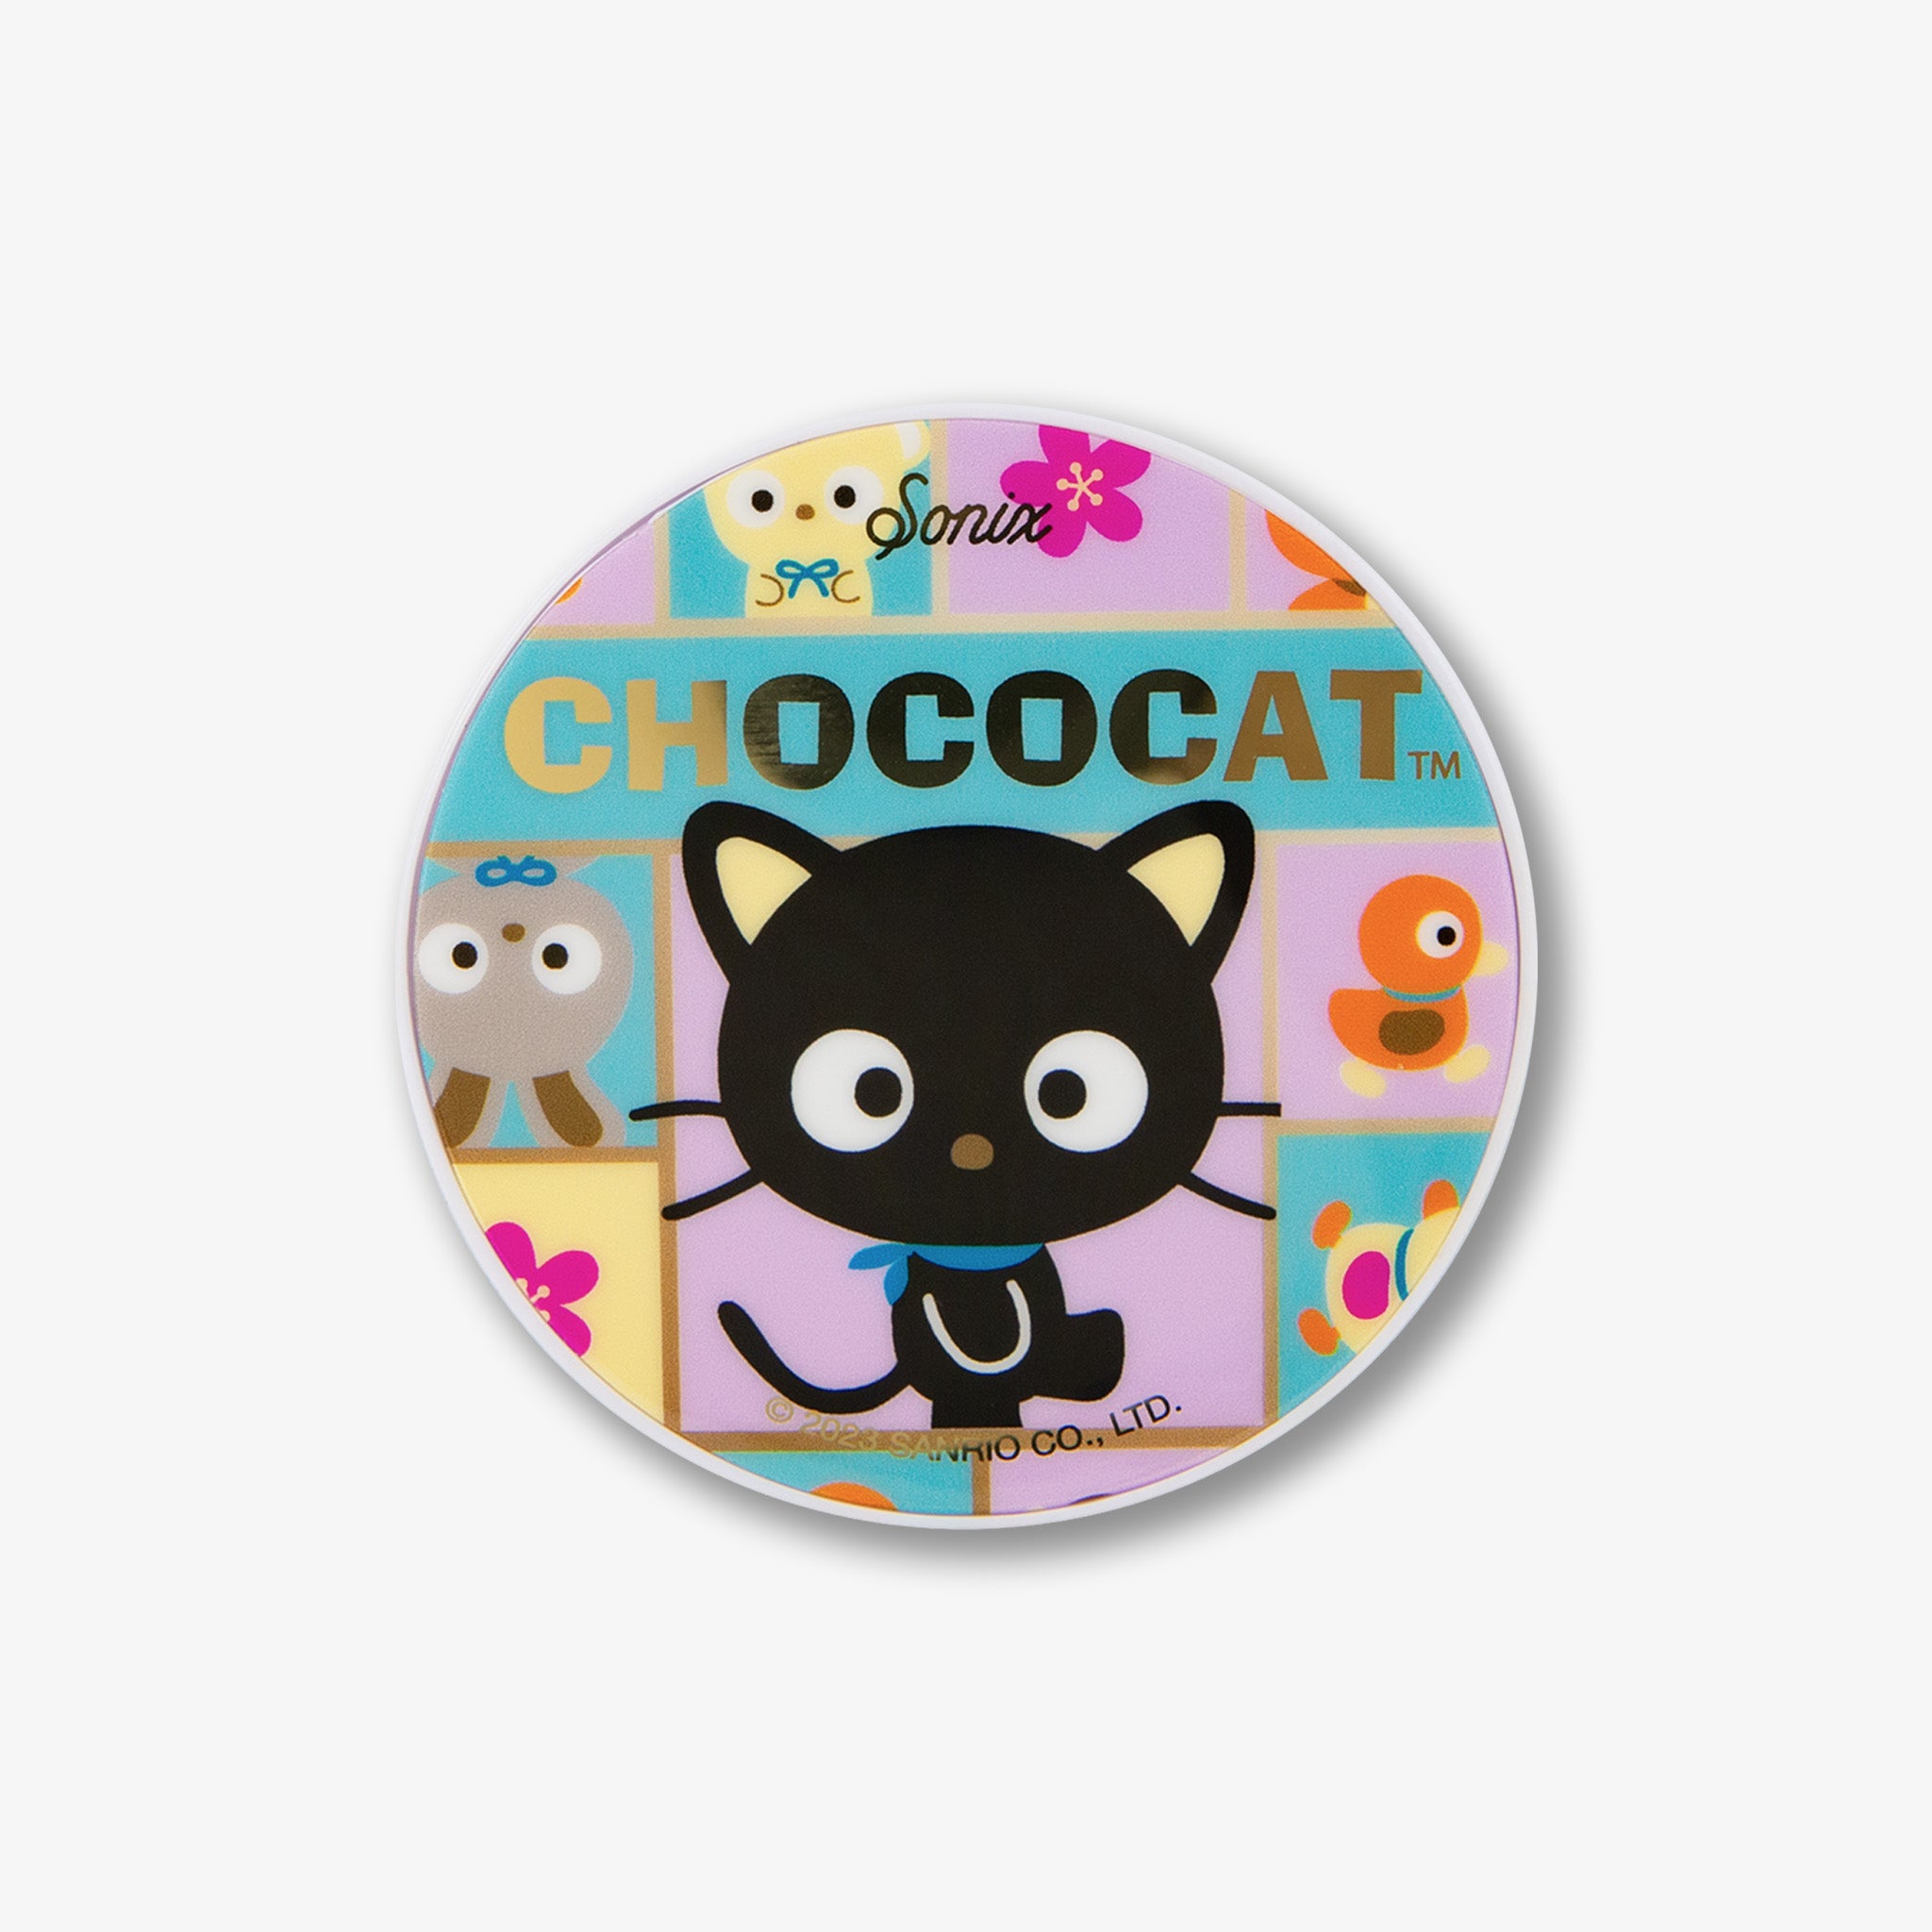 MagLink™ Magnetic Charger - Cool Like  Chococat™